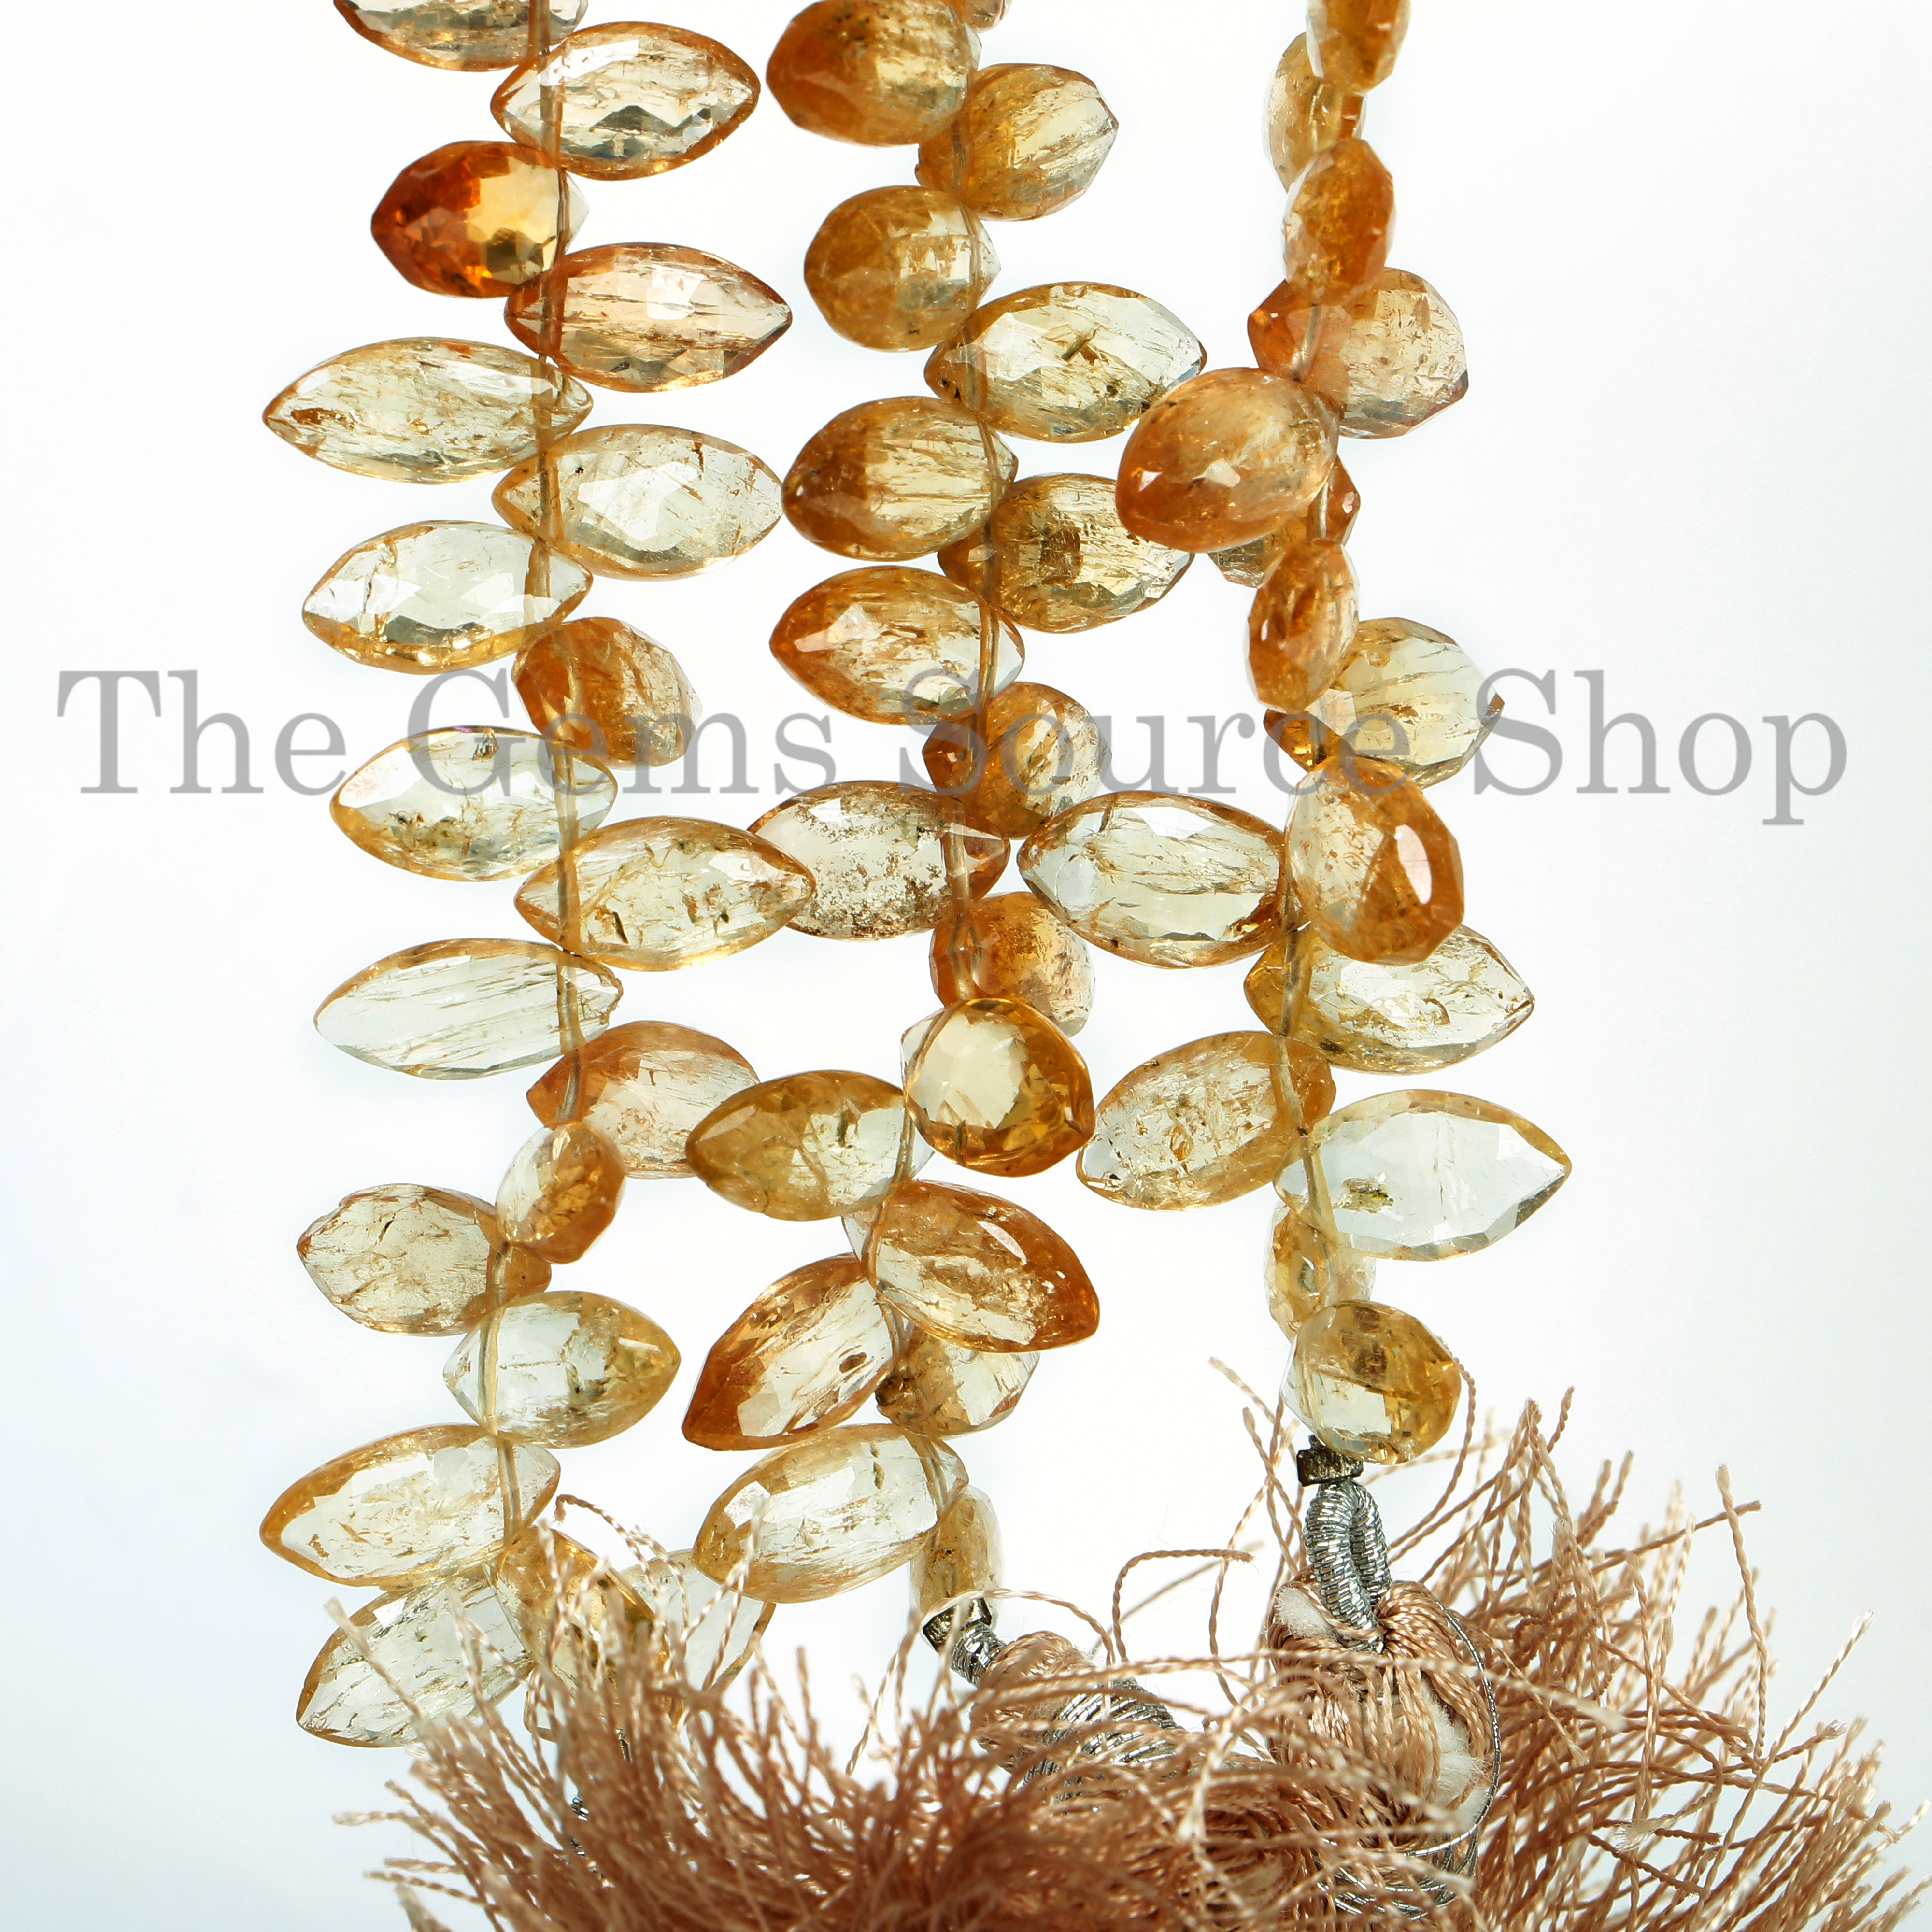 Imperial Topaz Beads, Imperial Topaz Faceted Marquise Shape Beads, Imperial Topaz Gemstone Beads